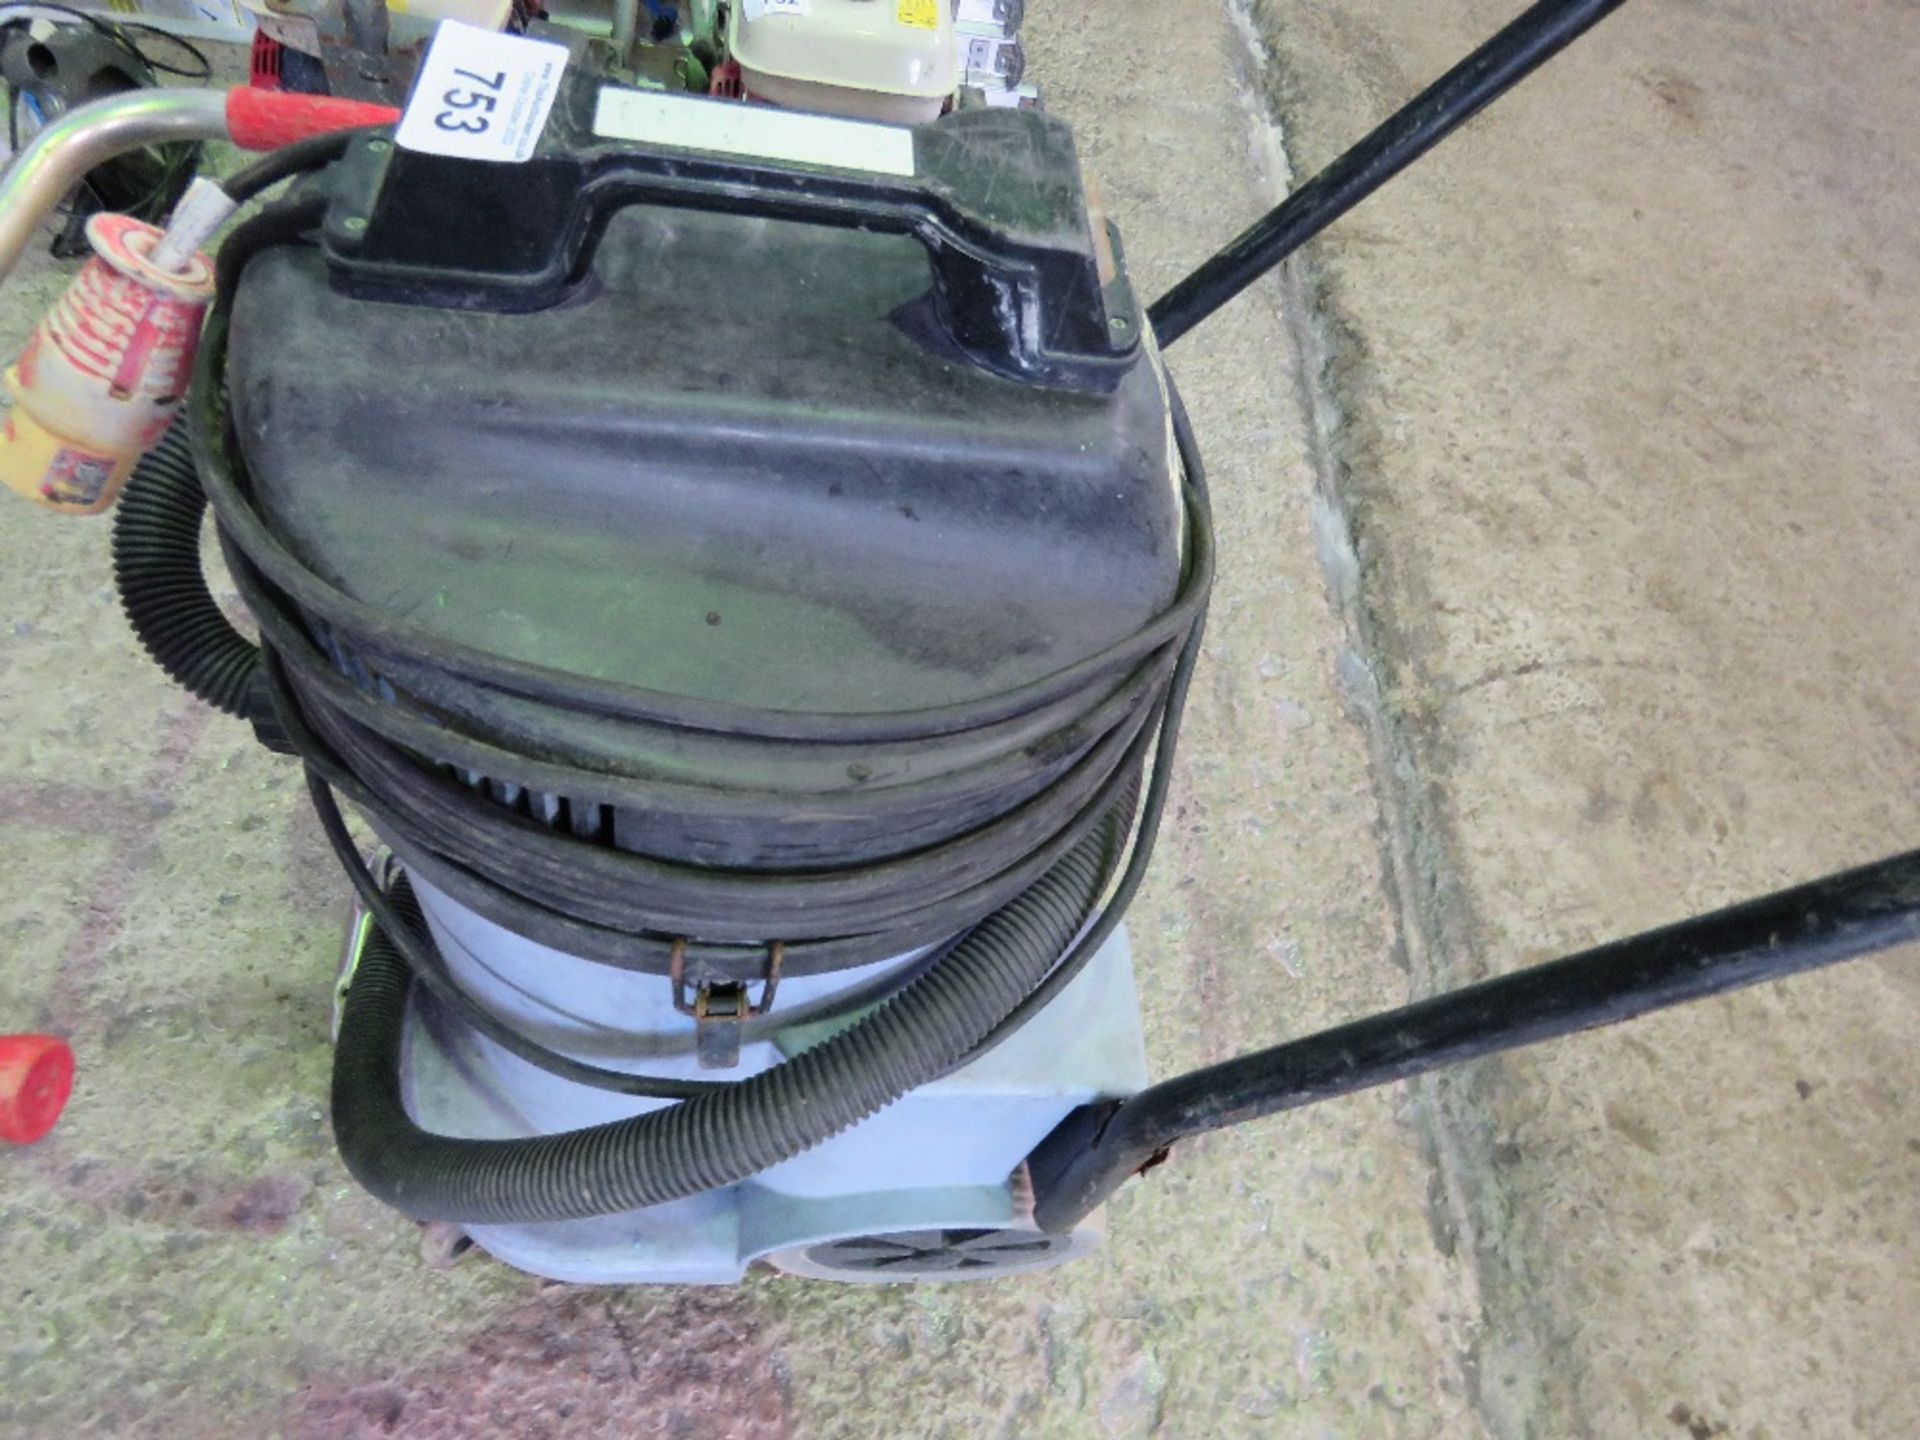 VACUUM CLEANER, 110VOLT POWERED. DIRECT FROM LOCAL COMPANY WHO ARE CLOSING THE LANDSCAPE MAINTENANCE - Image 2 of 2